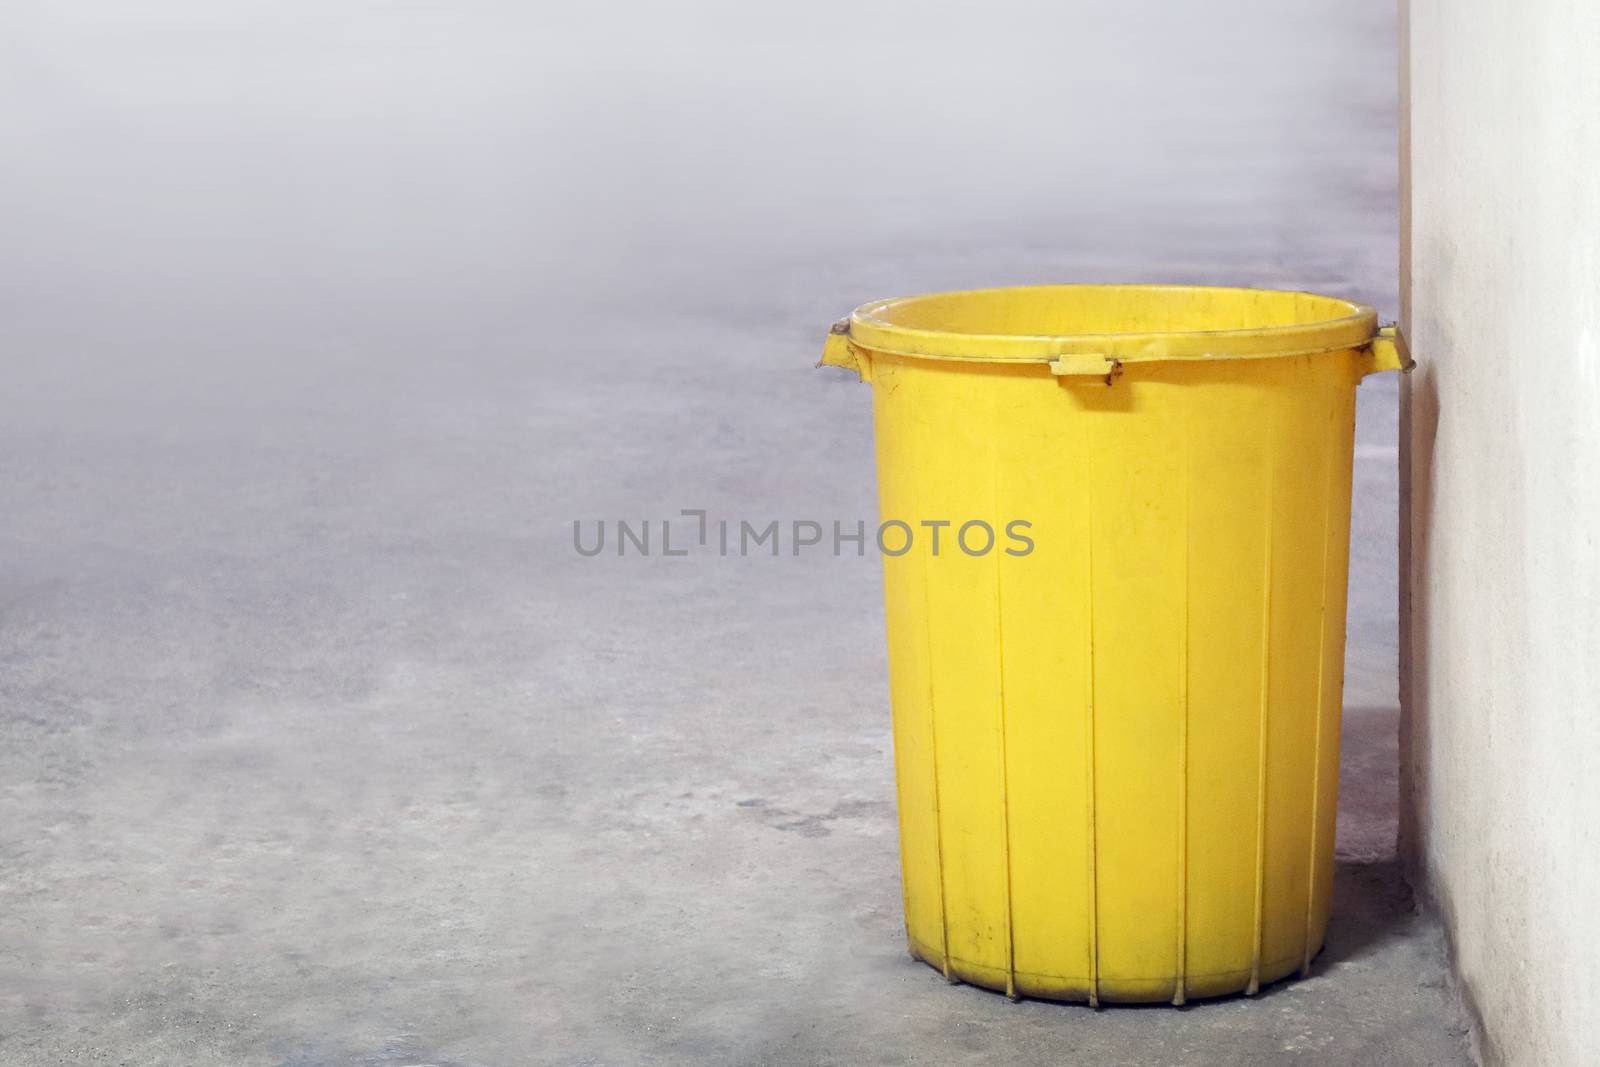 bin plastic yellow color old for waste dump, empty bin for garbage waste on floor, dirty bin plastic, trash bin for recycle waste by cgdeaw